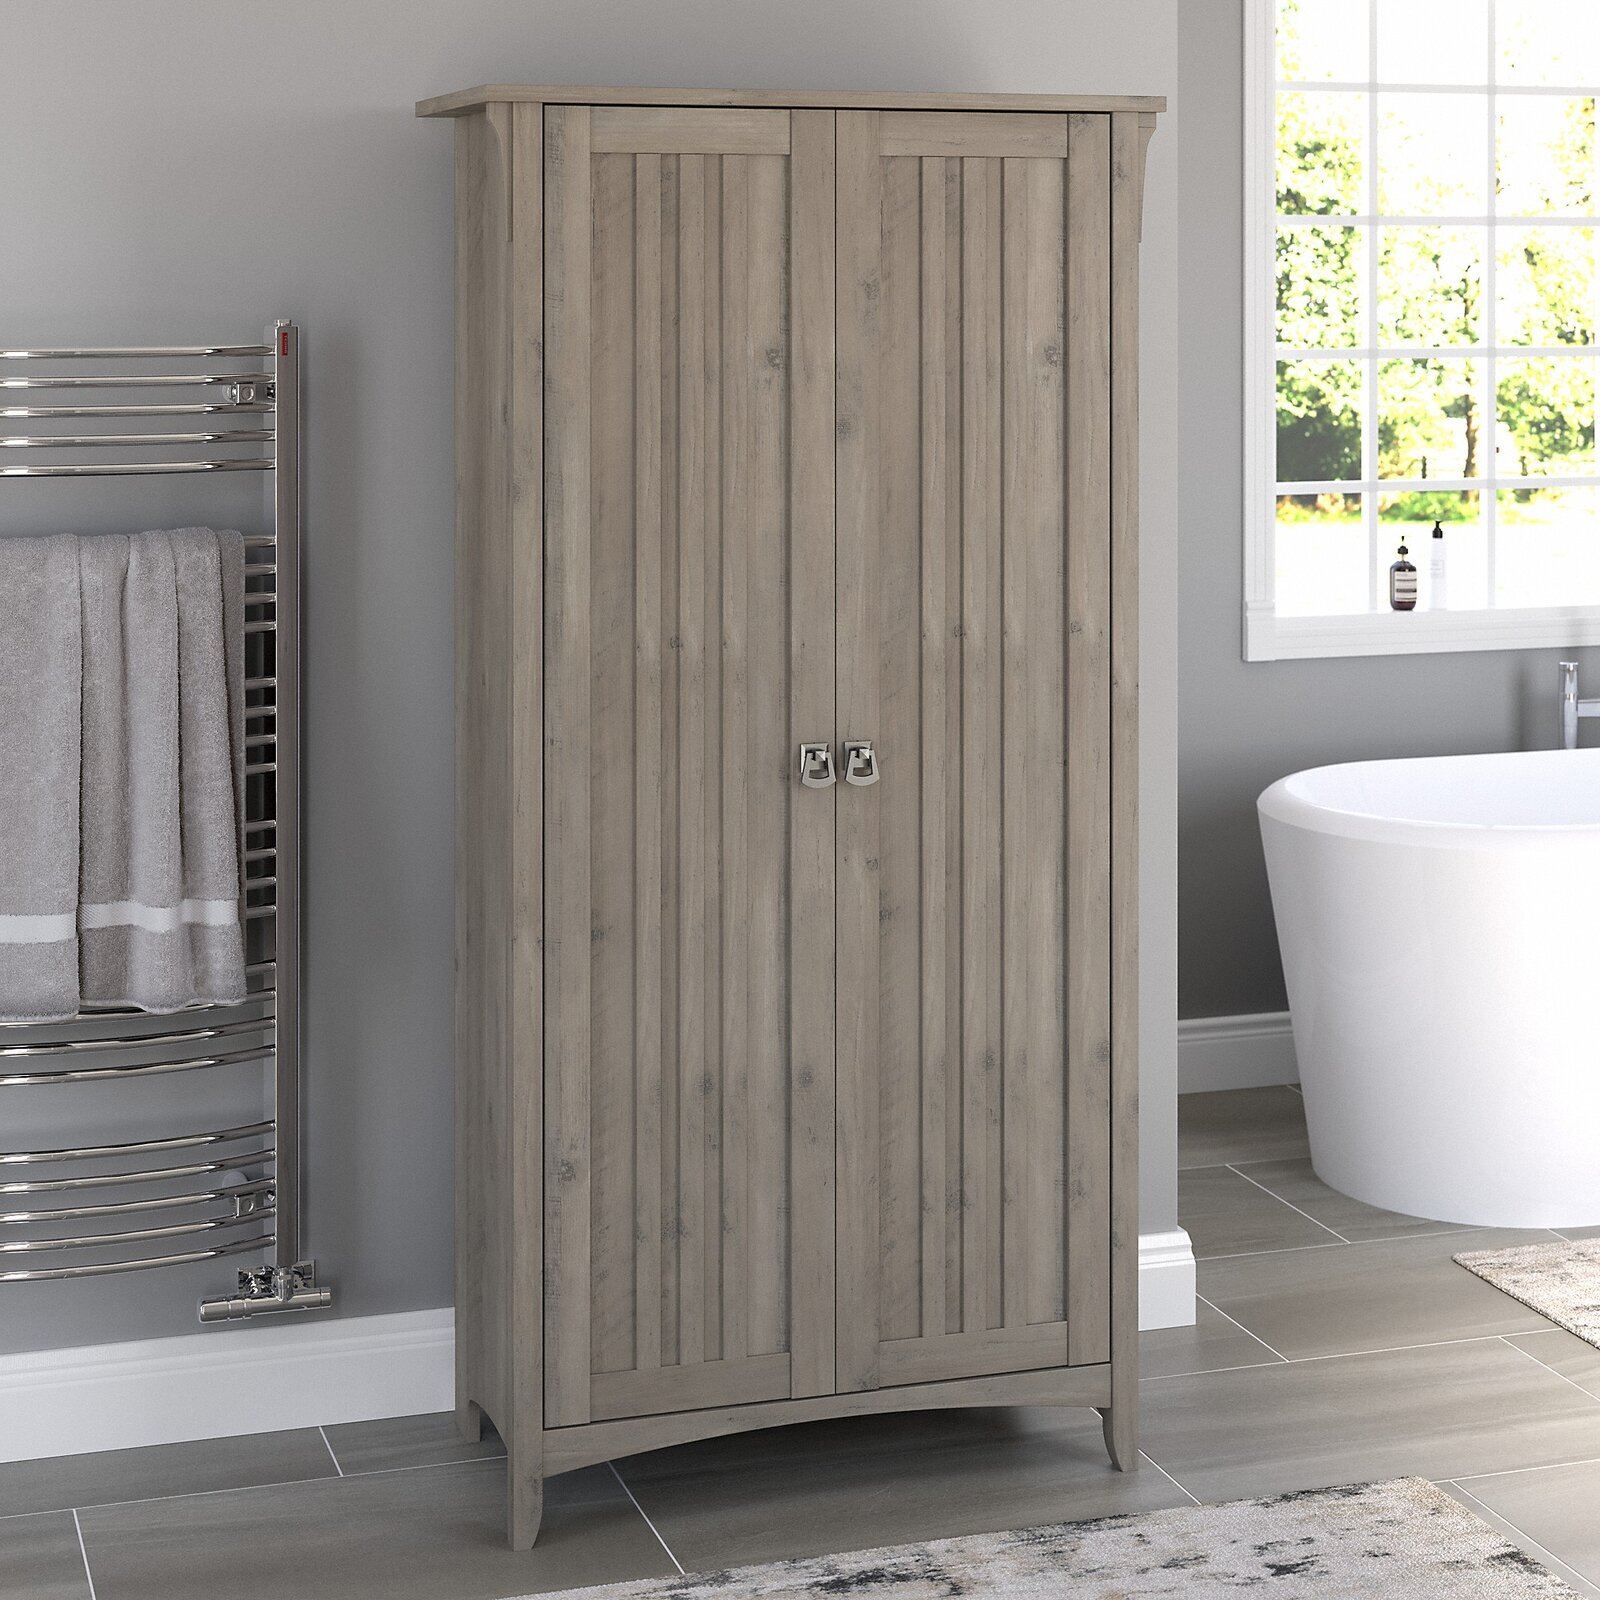 Modern farmhouse grey cabinet with tall tower doors